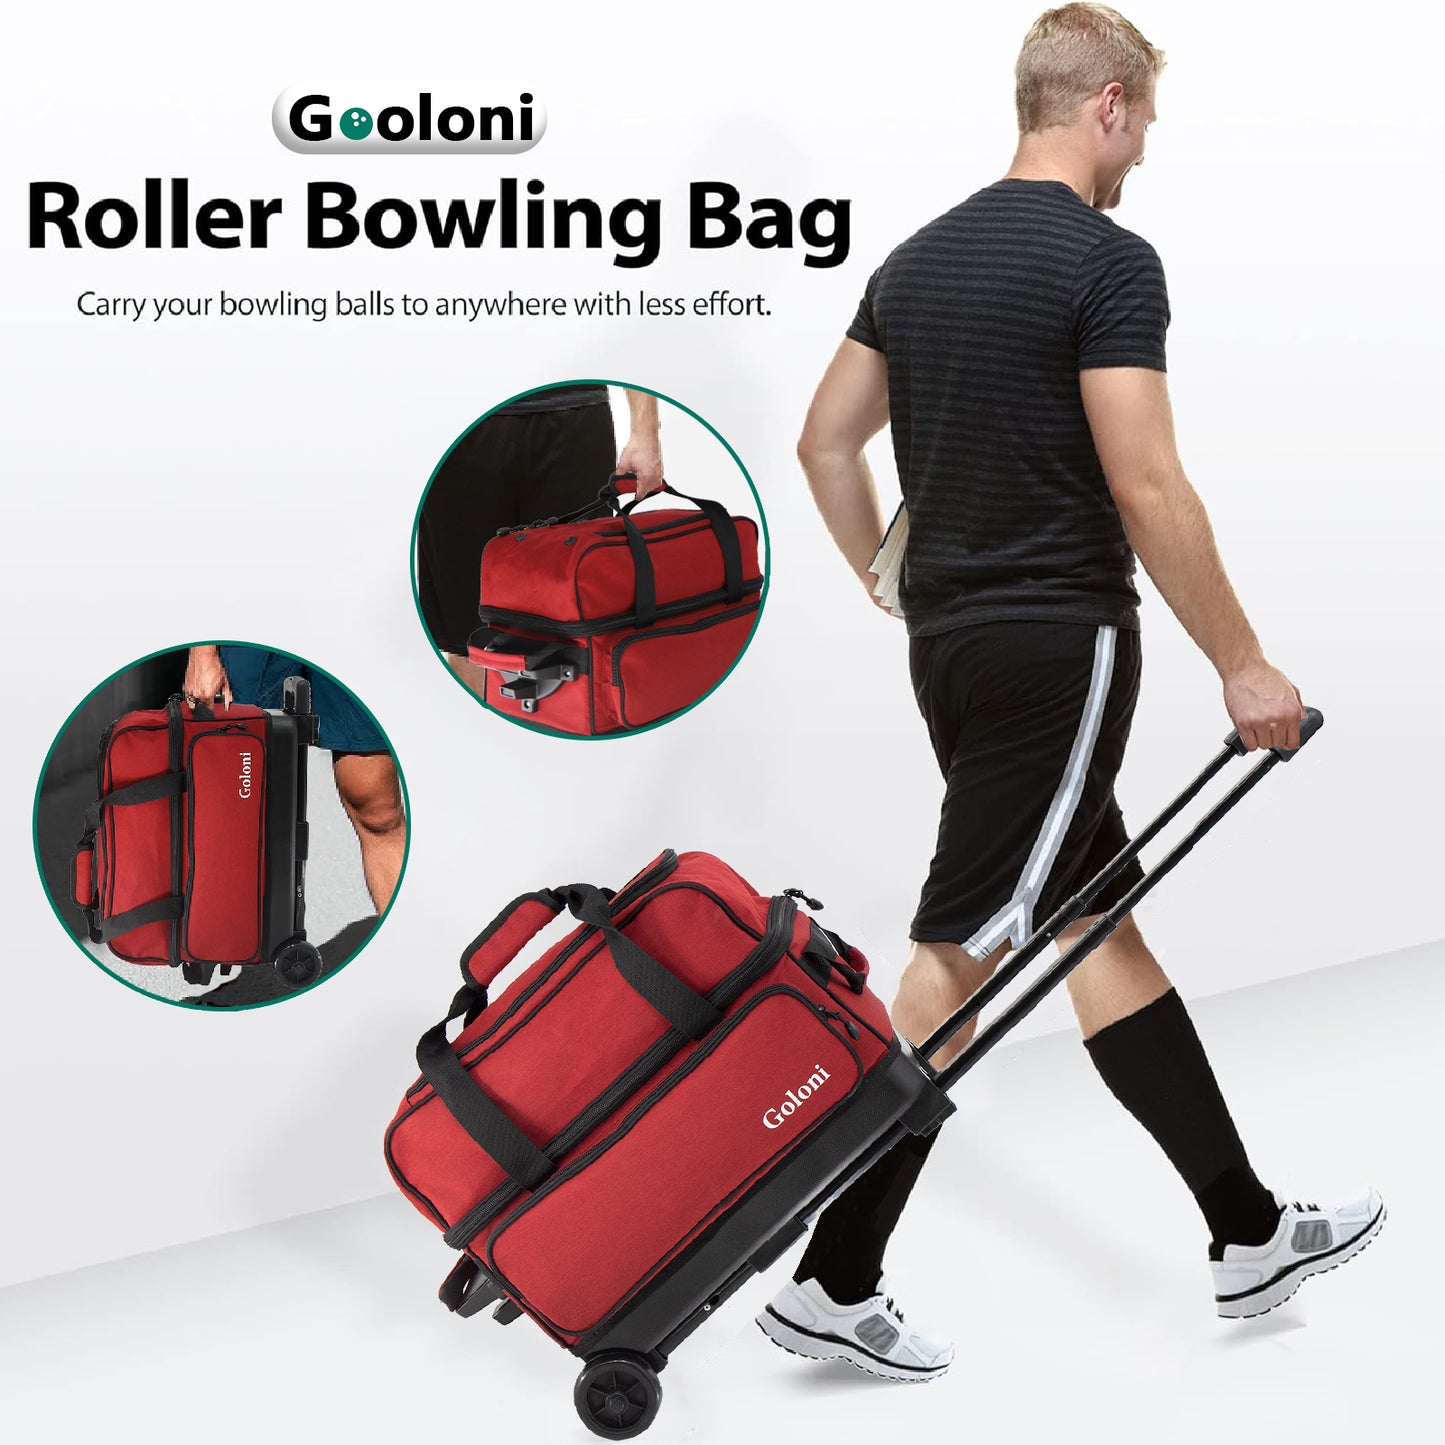 Goloni Double Roller 2 Ball Bowling Bag with Large Separate Shoe Compartment for Bowling Shoes (Up To US Mens Size 15) -Retractable Handle Extends to 40"